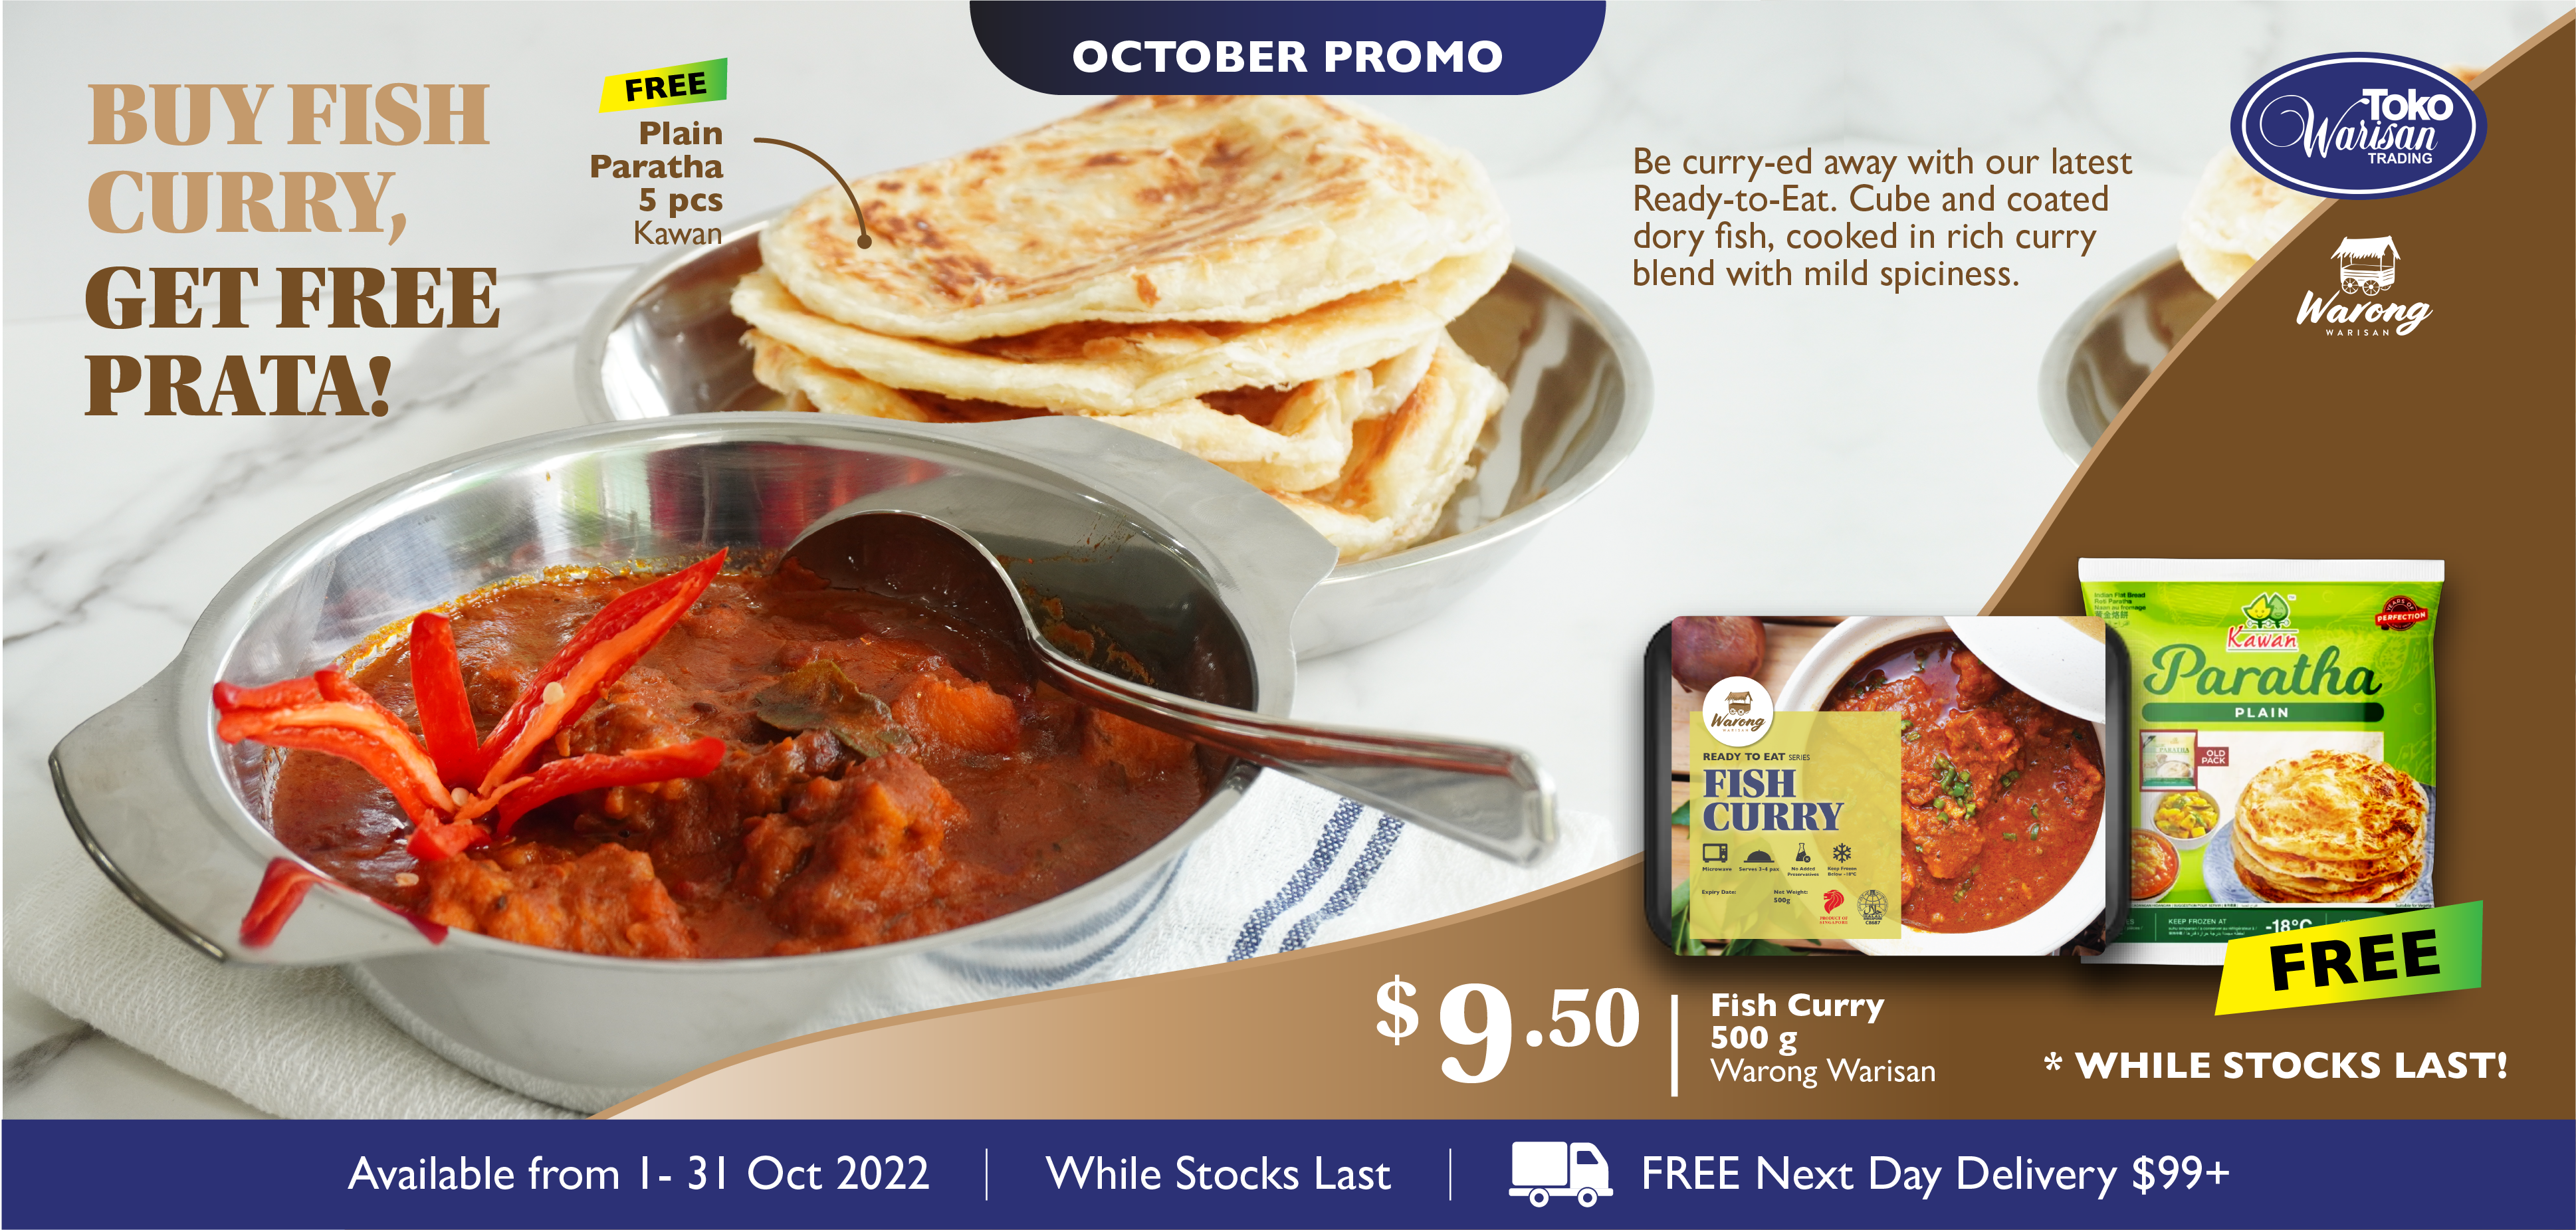 october monthly promotion childrens day special fish curry warong warisan prata